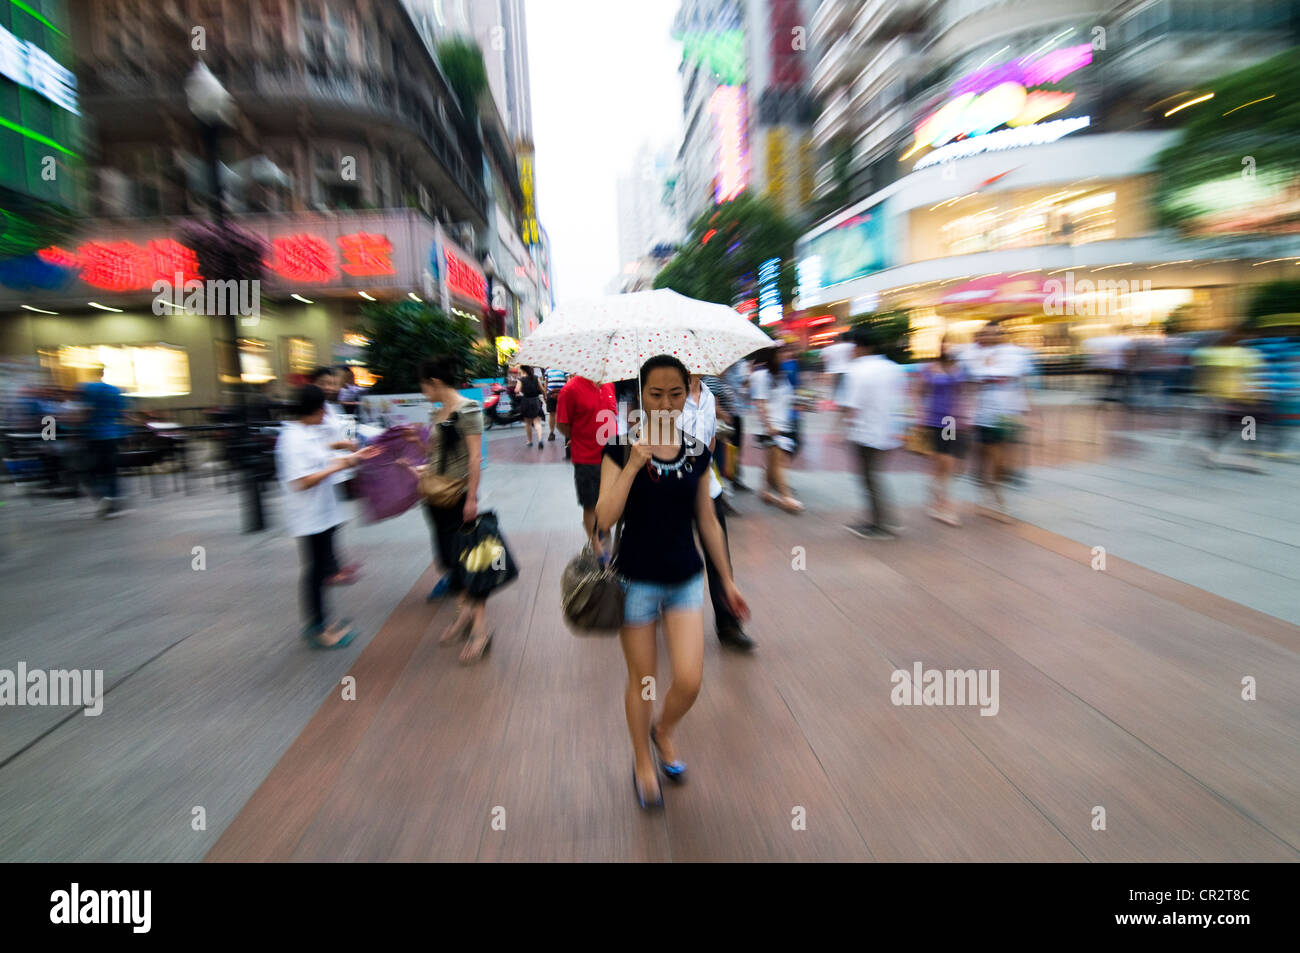 Busy shopping street in the concession area of Hankou, Wuhan, China. Stock Photo